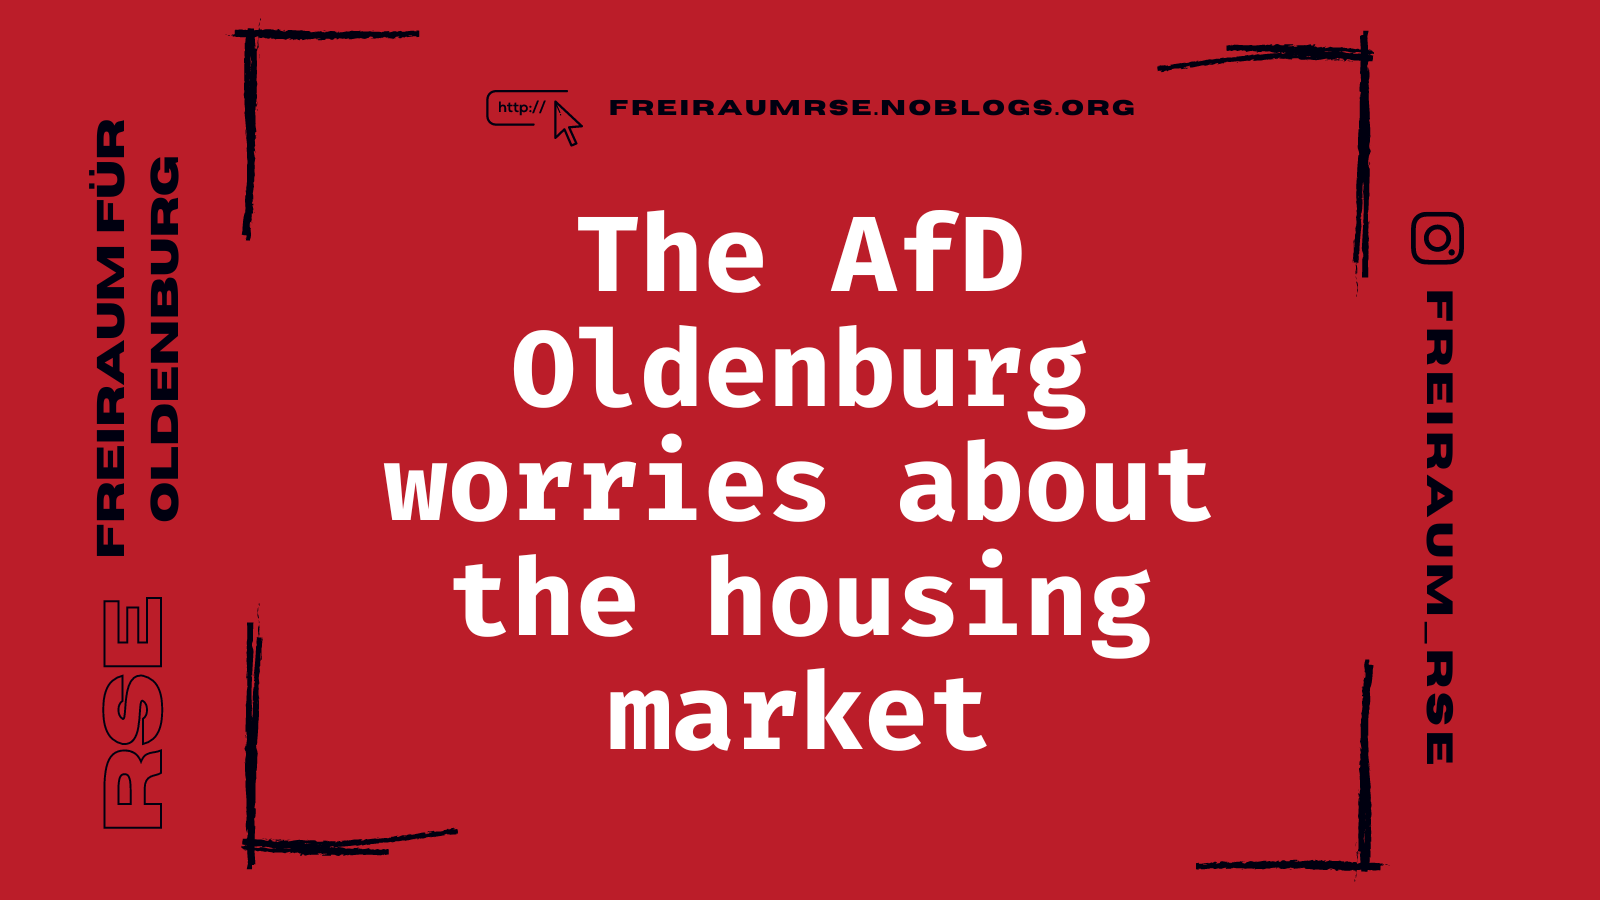 The AfD Oldenburg worries about the housing market